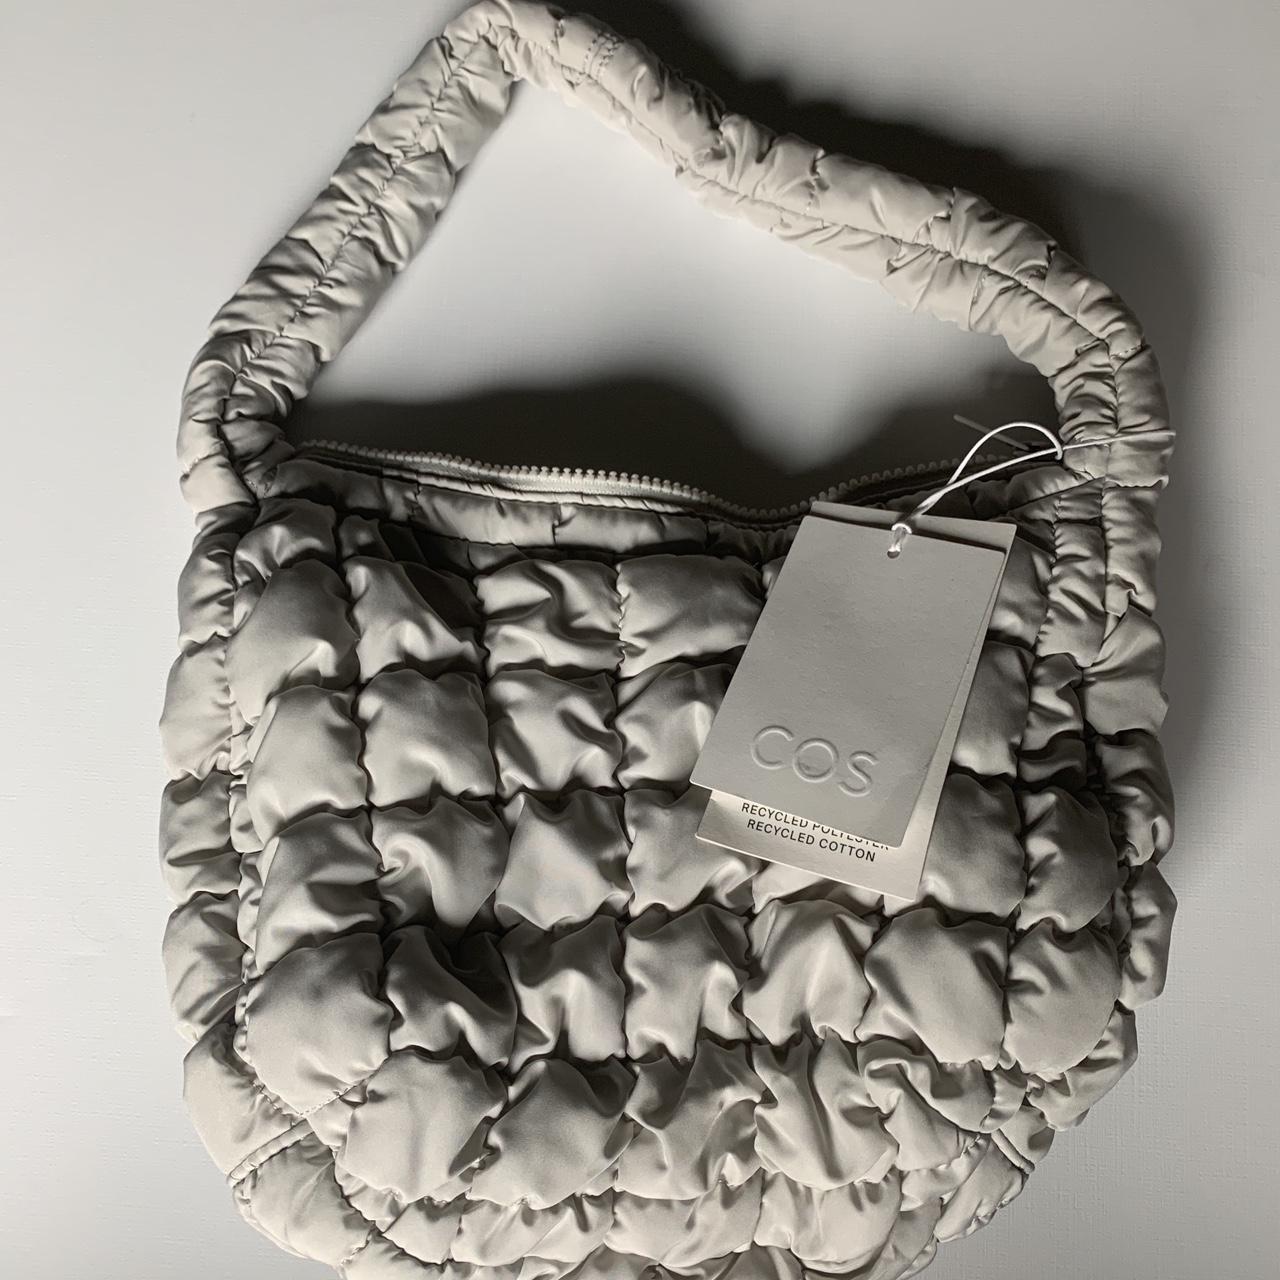 COS Women's Grey and White Bag (3)